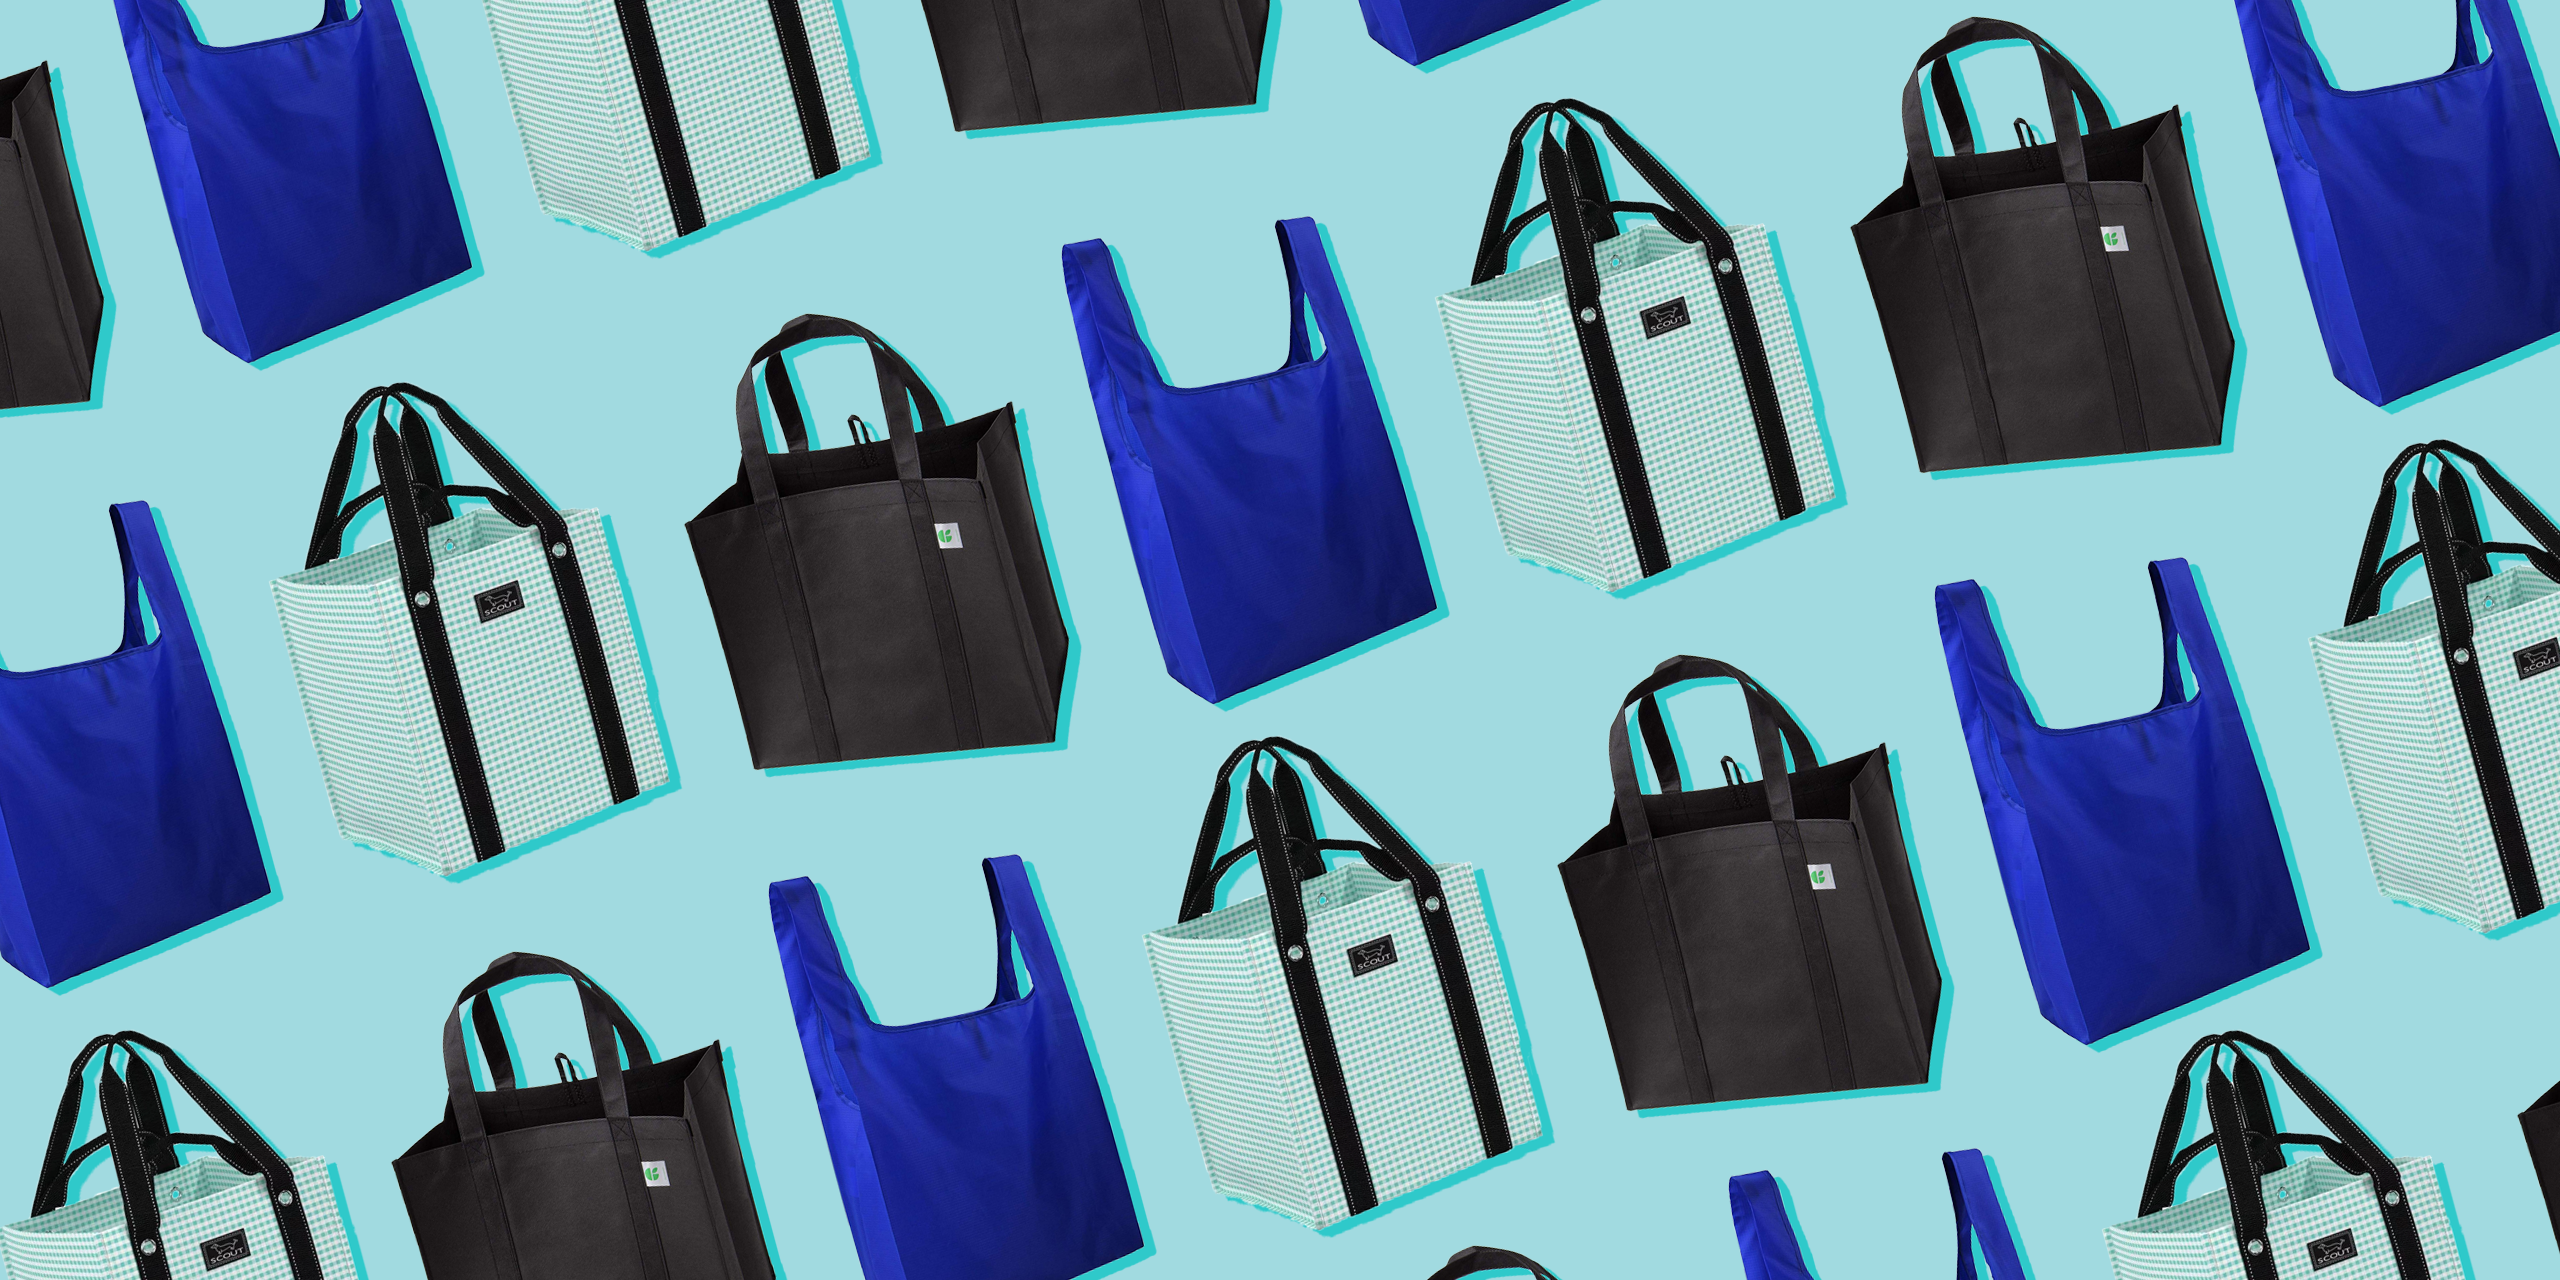 The Best Reusable Grocery Bags